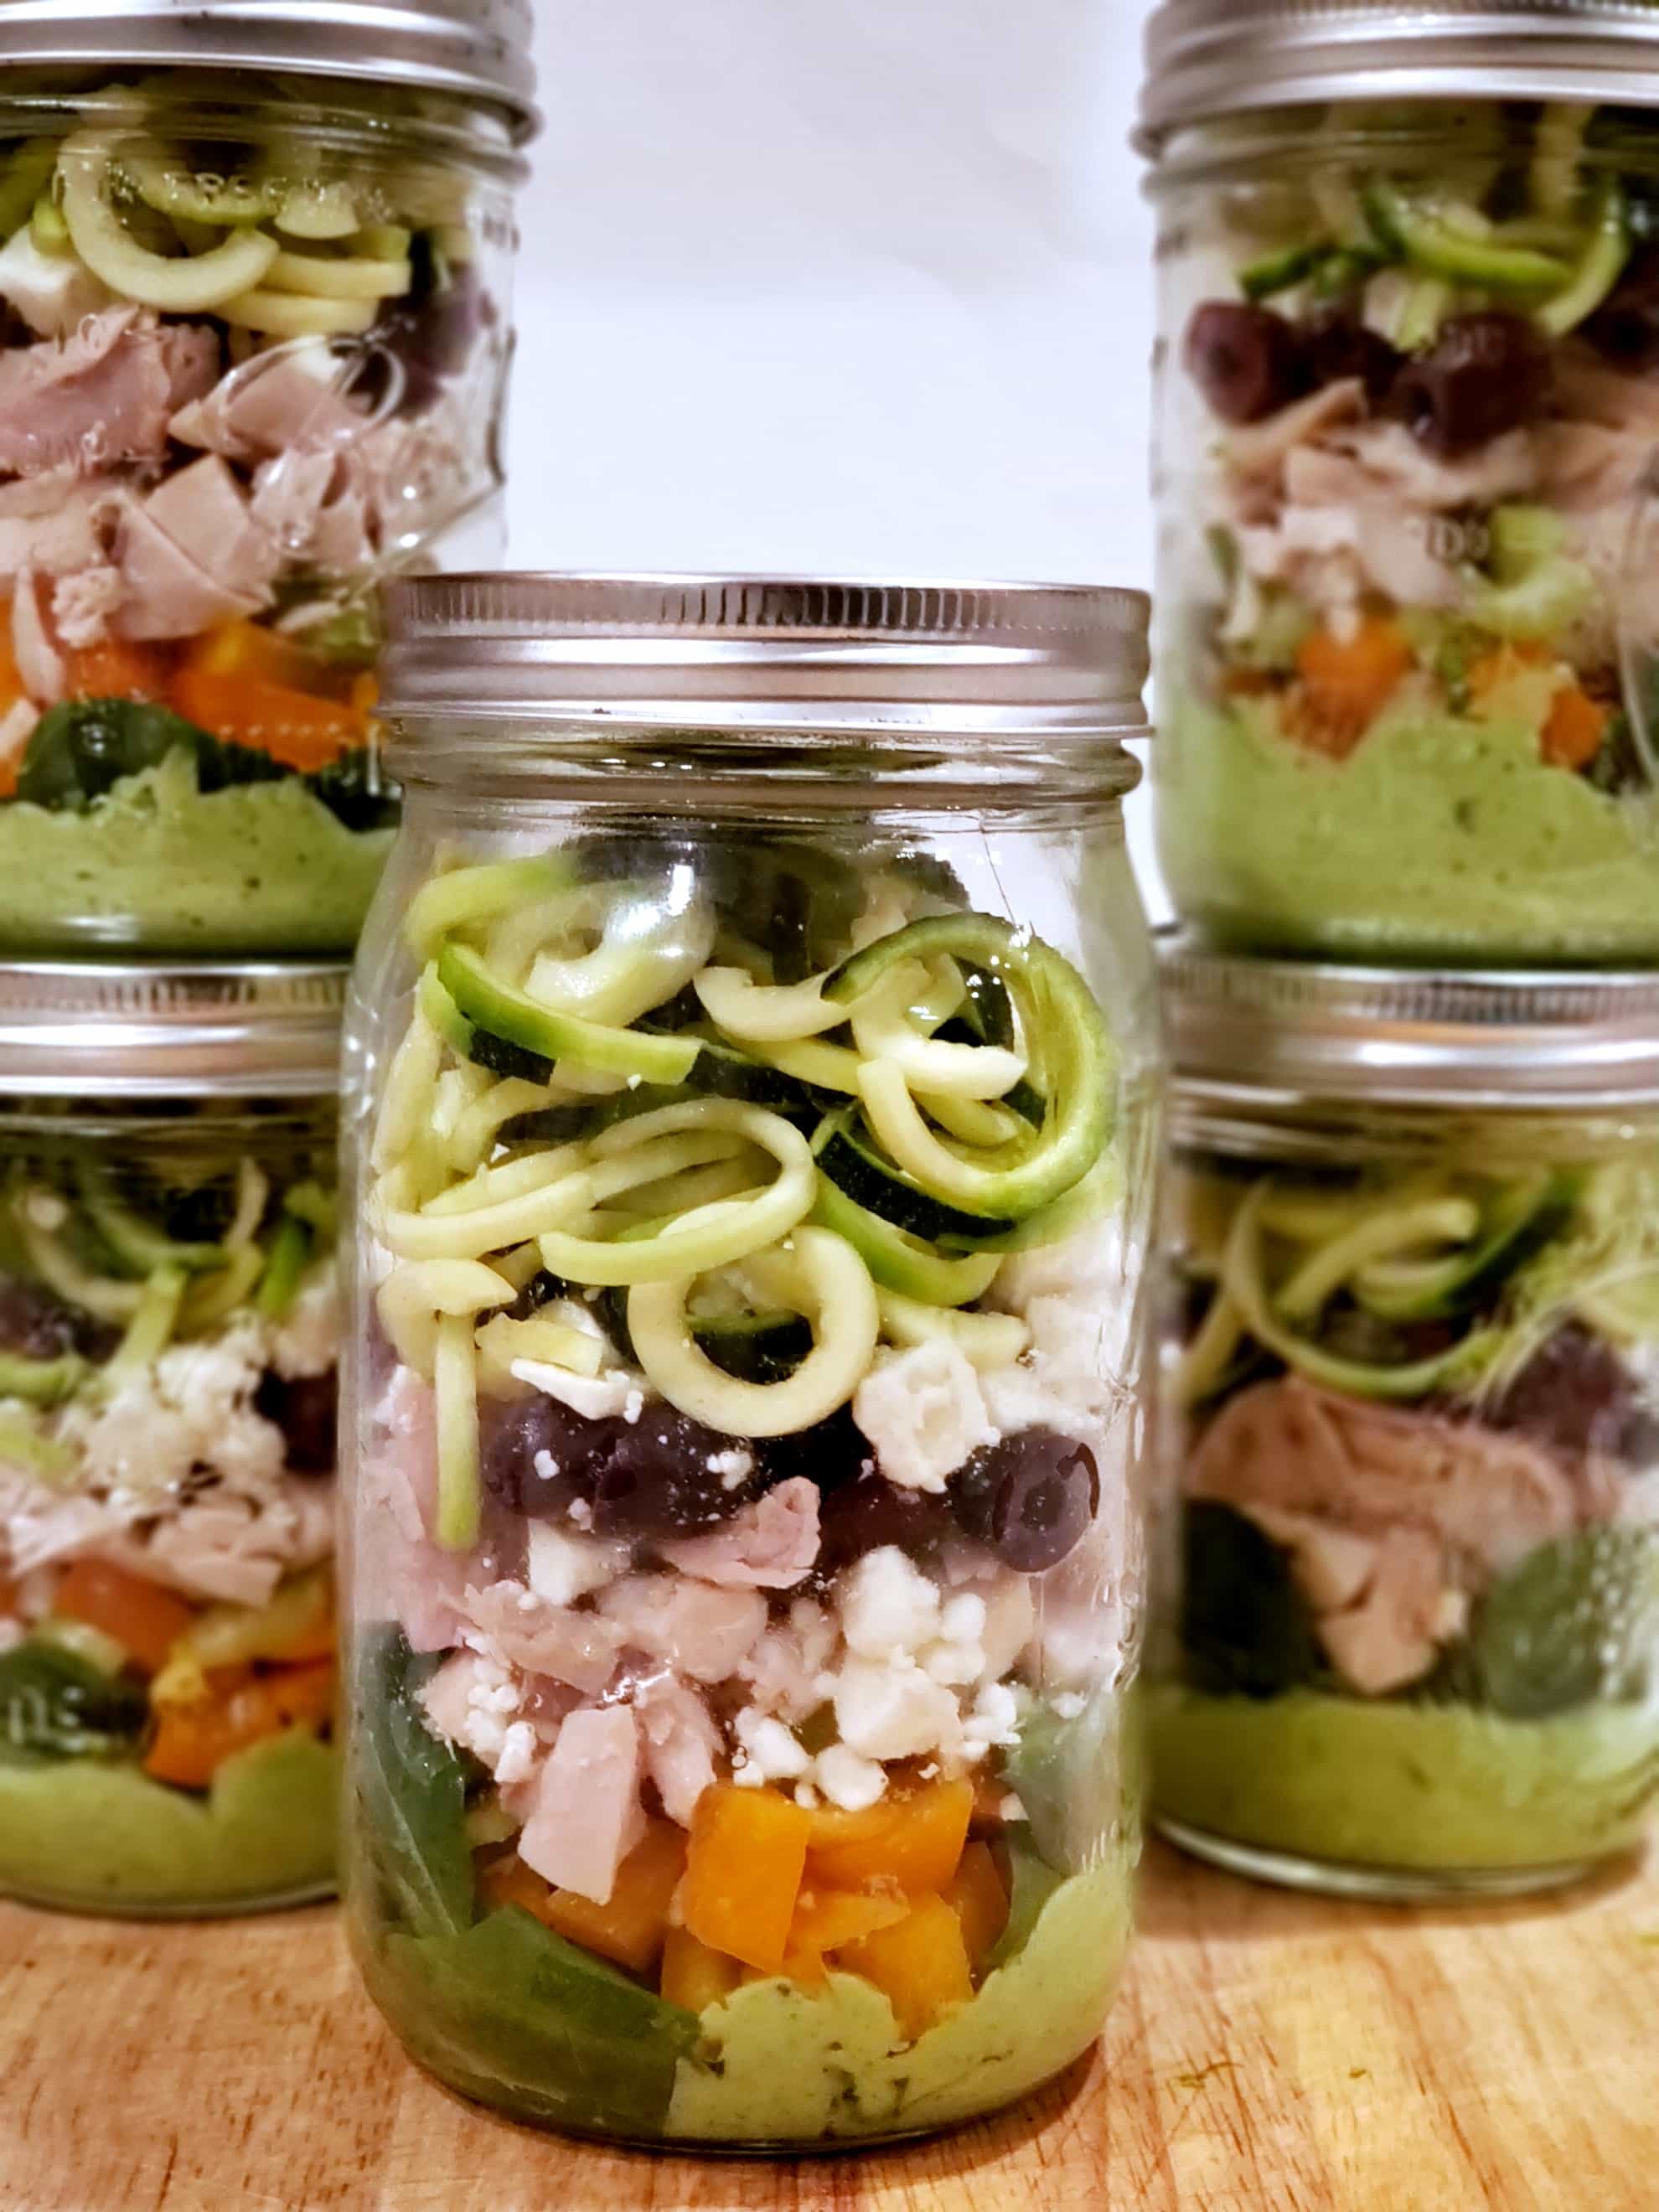 This Zucchini Noodle Salad with chicken recipe is fun to make and put in a mason jar for an easy healthy make ahead lunch for work. Clean eating made super easy with meal prepping. #mealprep #cleaneats